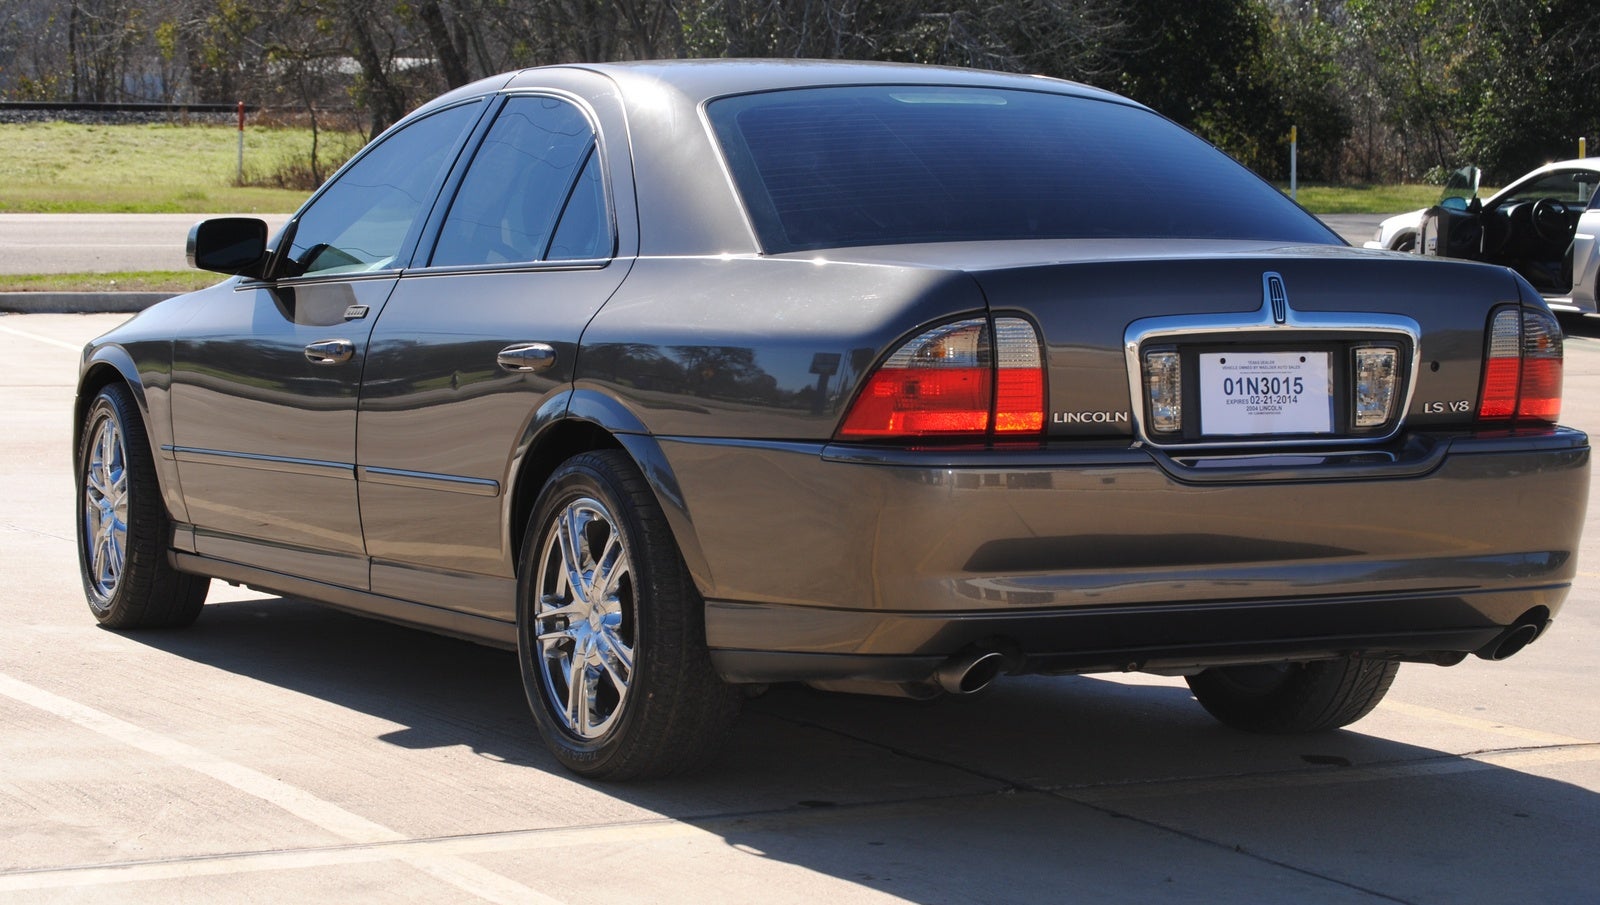 2004 Lincoln LS Information and photos MOMENTcar